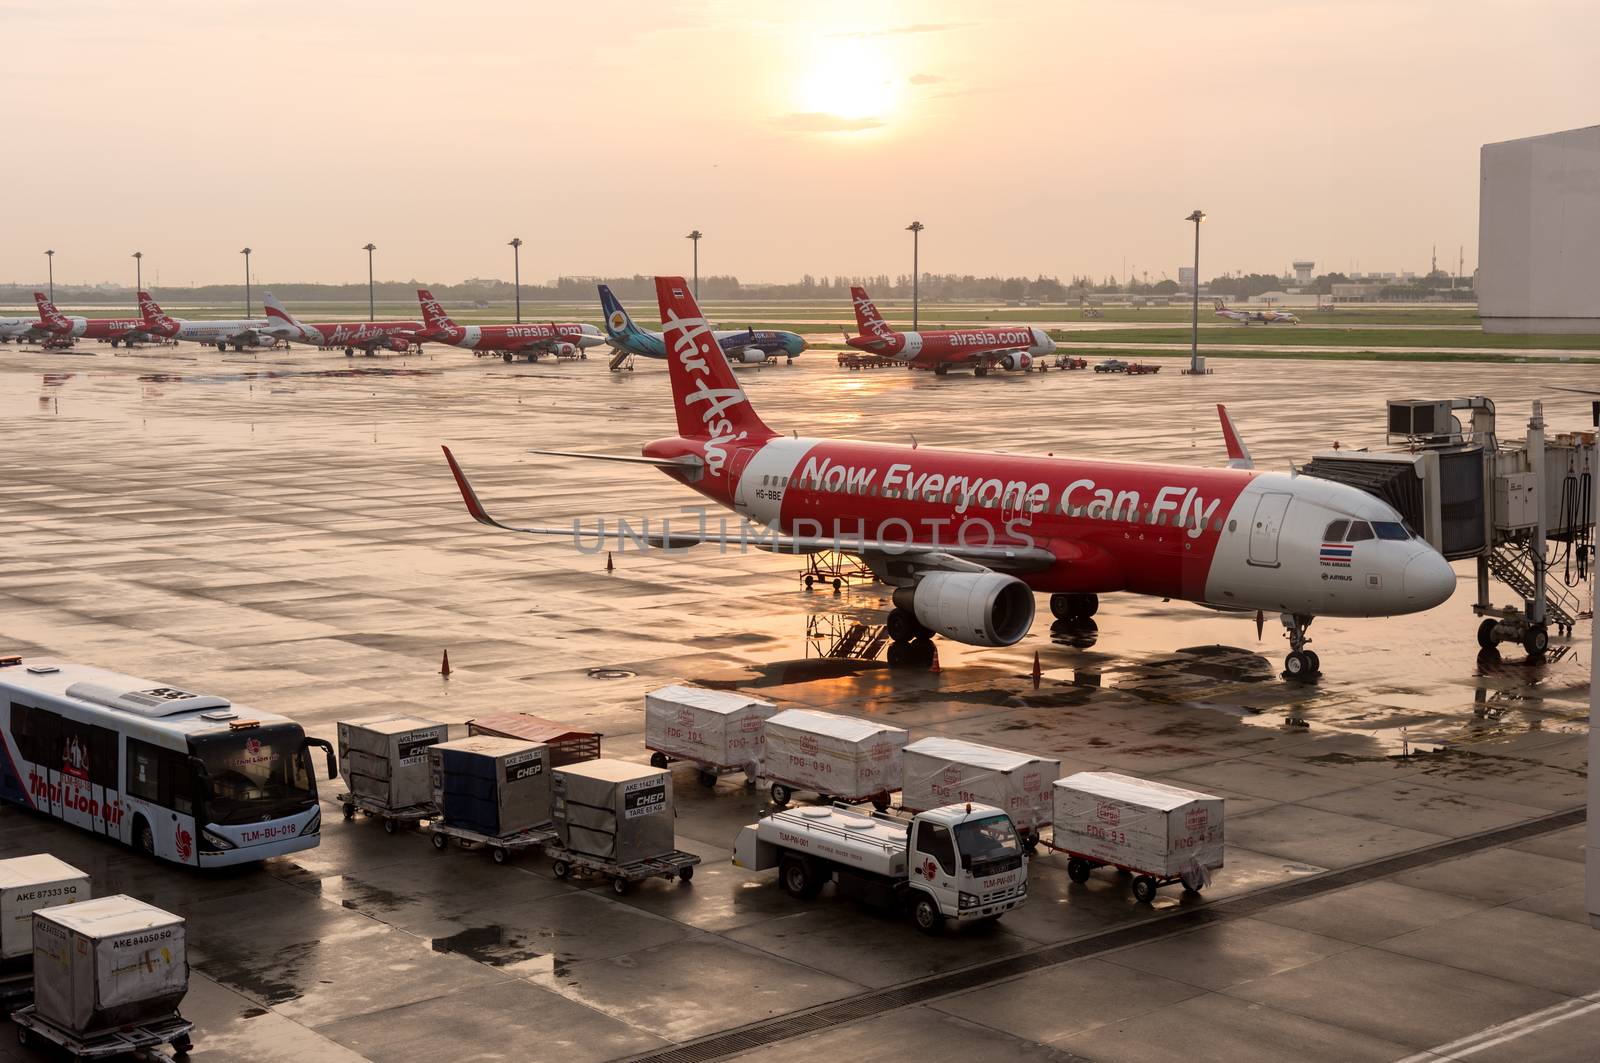 BANGKOK, THAILAND - May 23, 2017: Airliner Air-Asia Airbus at Bangkok Donmuang Airport on May 23, 2017. Air Asia company is the largest low cost airlines in Asia